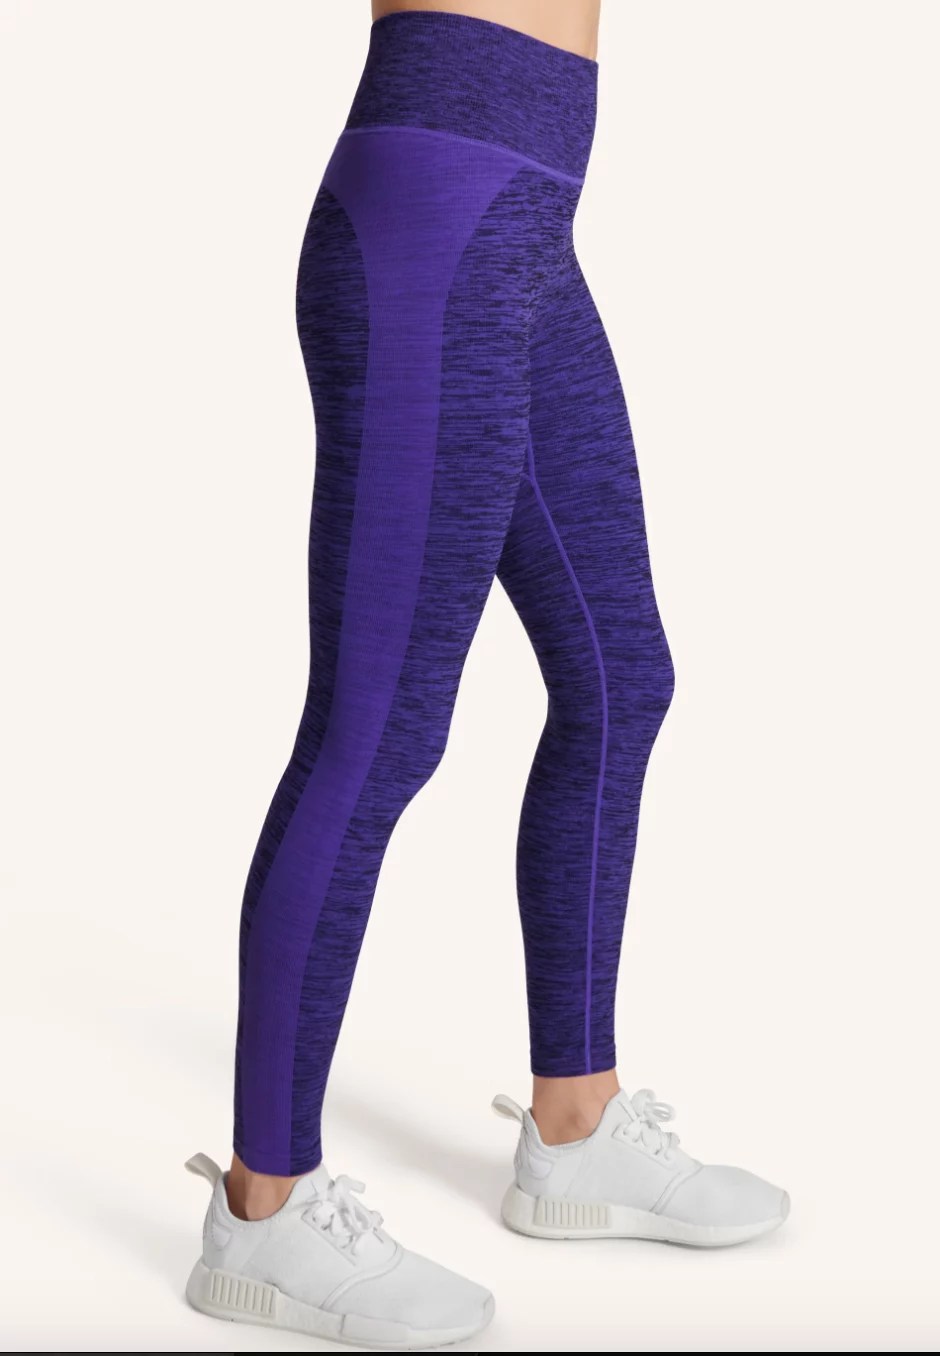 The lower body of a model showing off a pair of purple ankle length leggings with white sneakers.